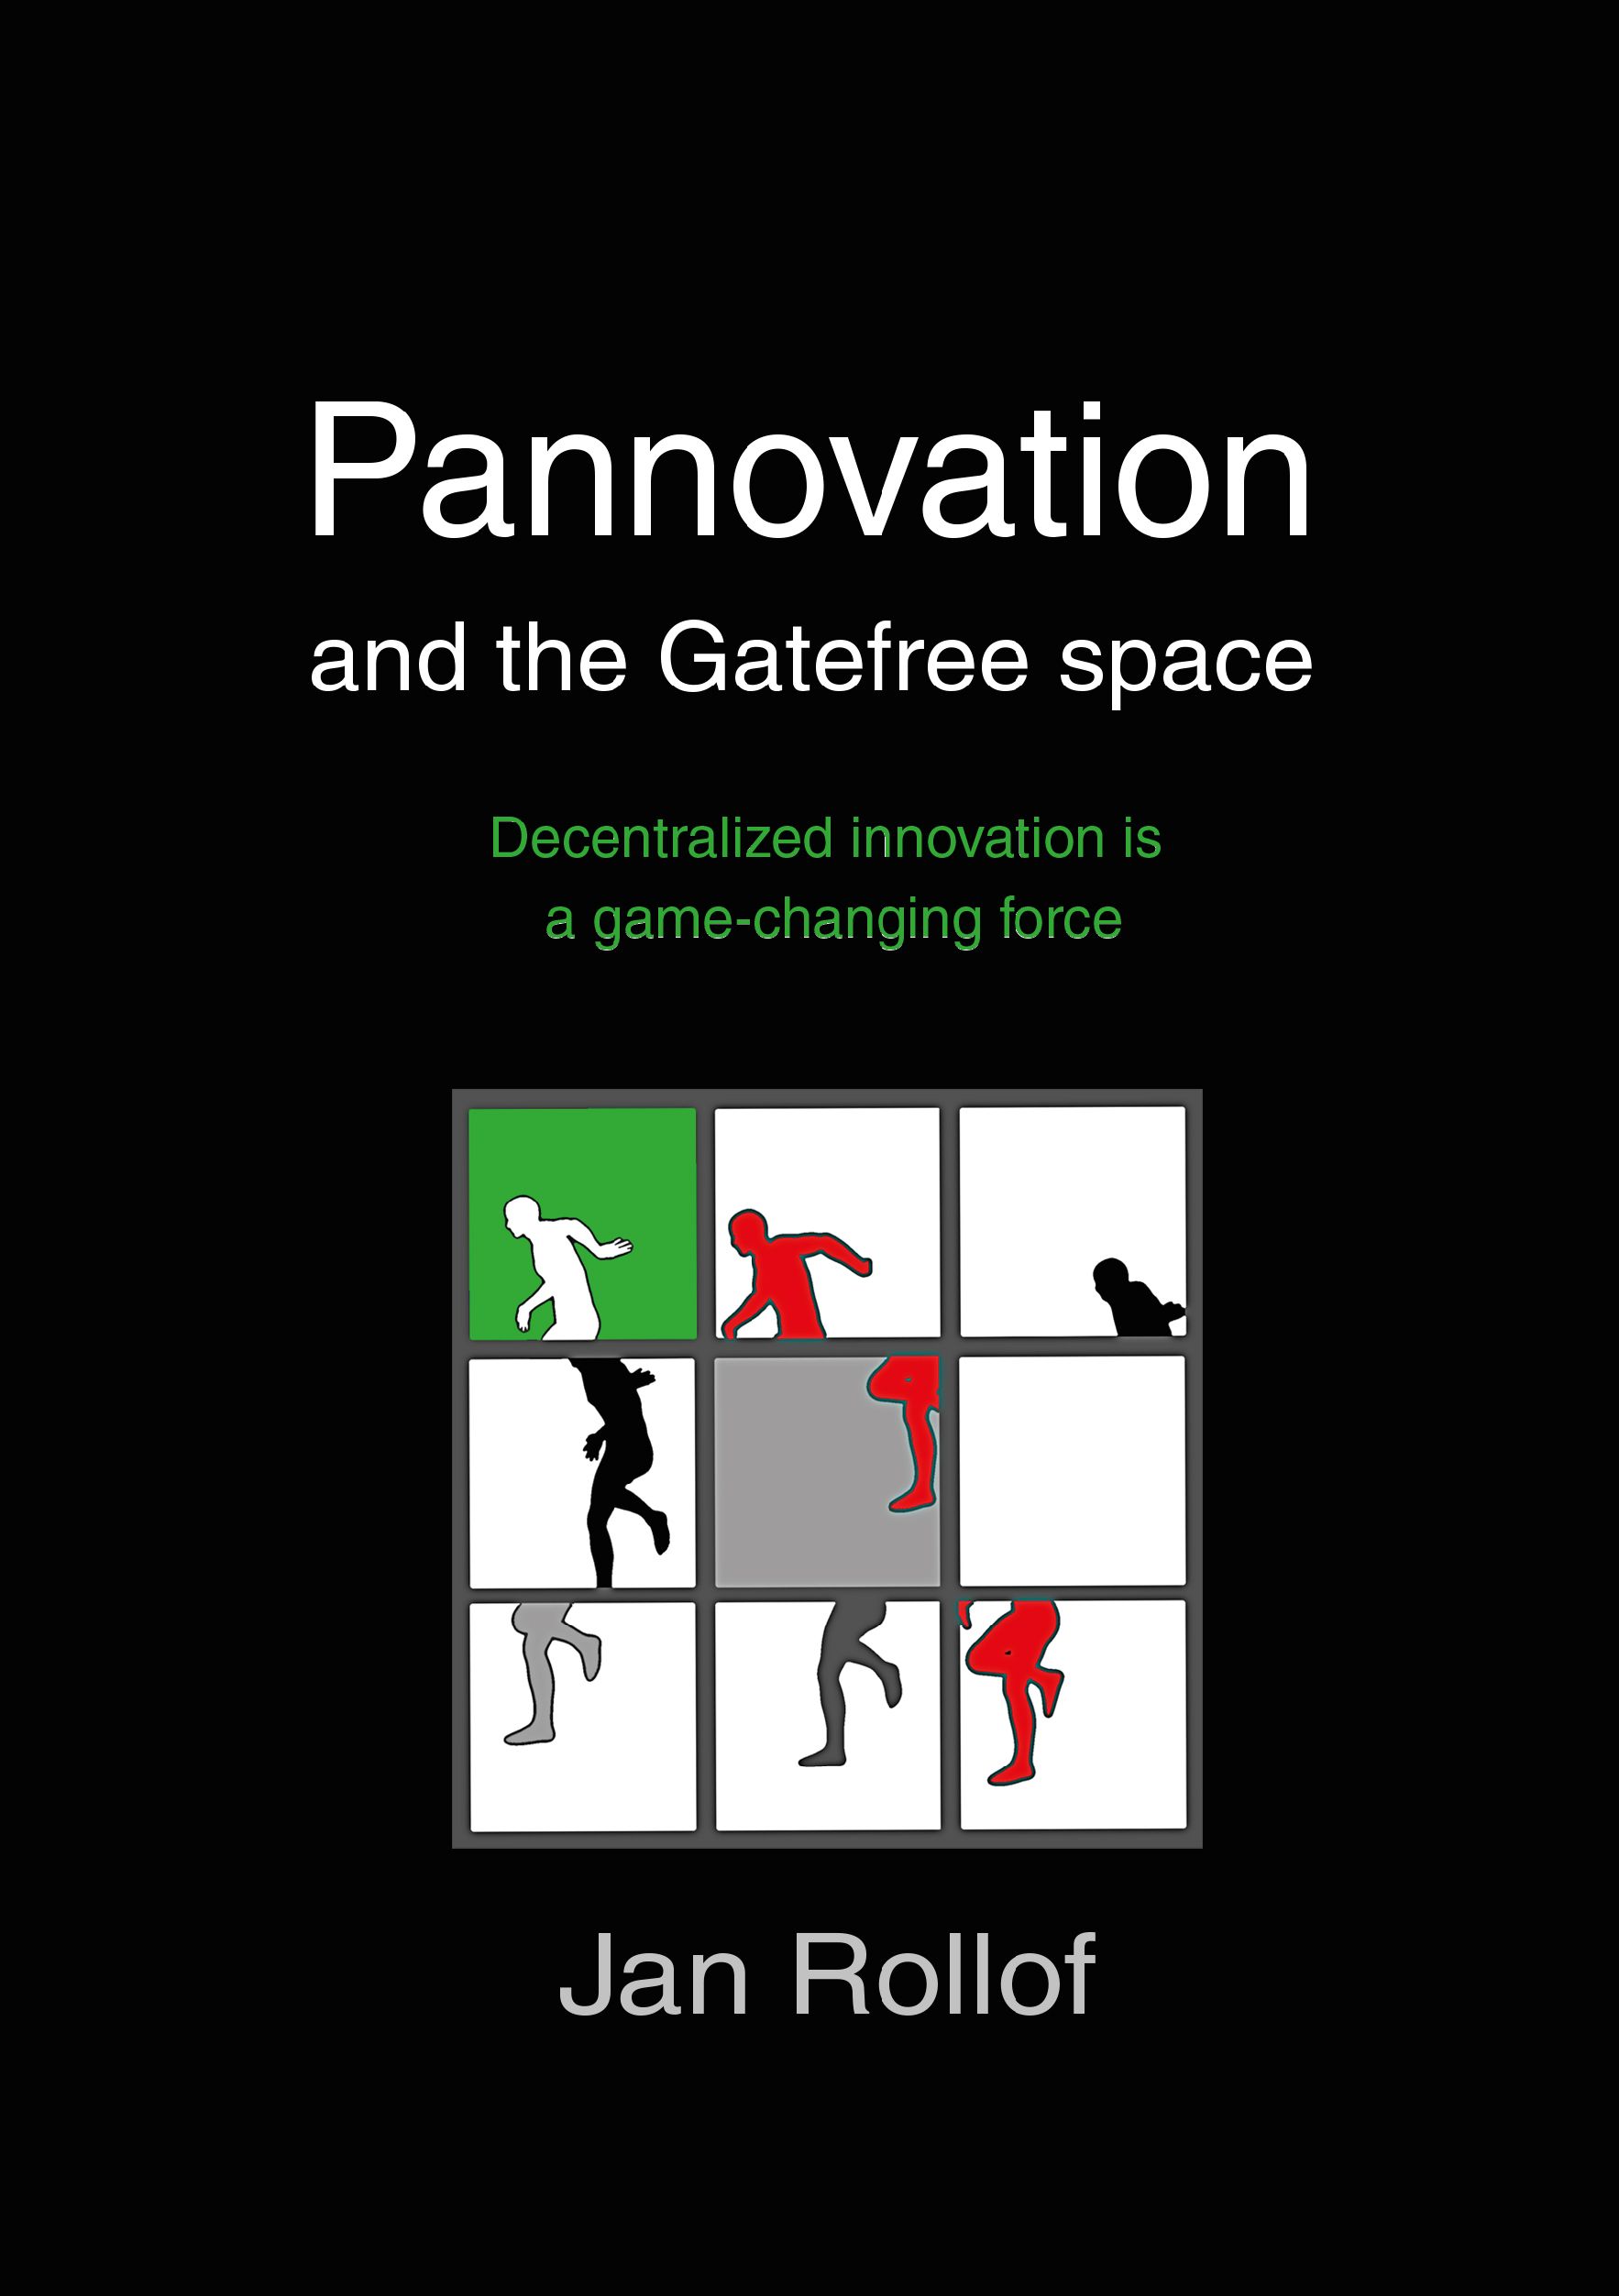 Pannovation and the Gatefree Space, eBook by Jan Rollof